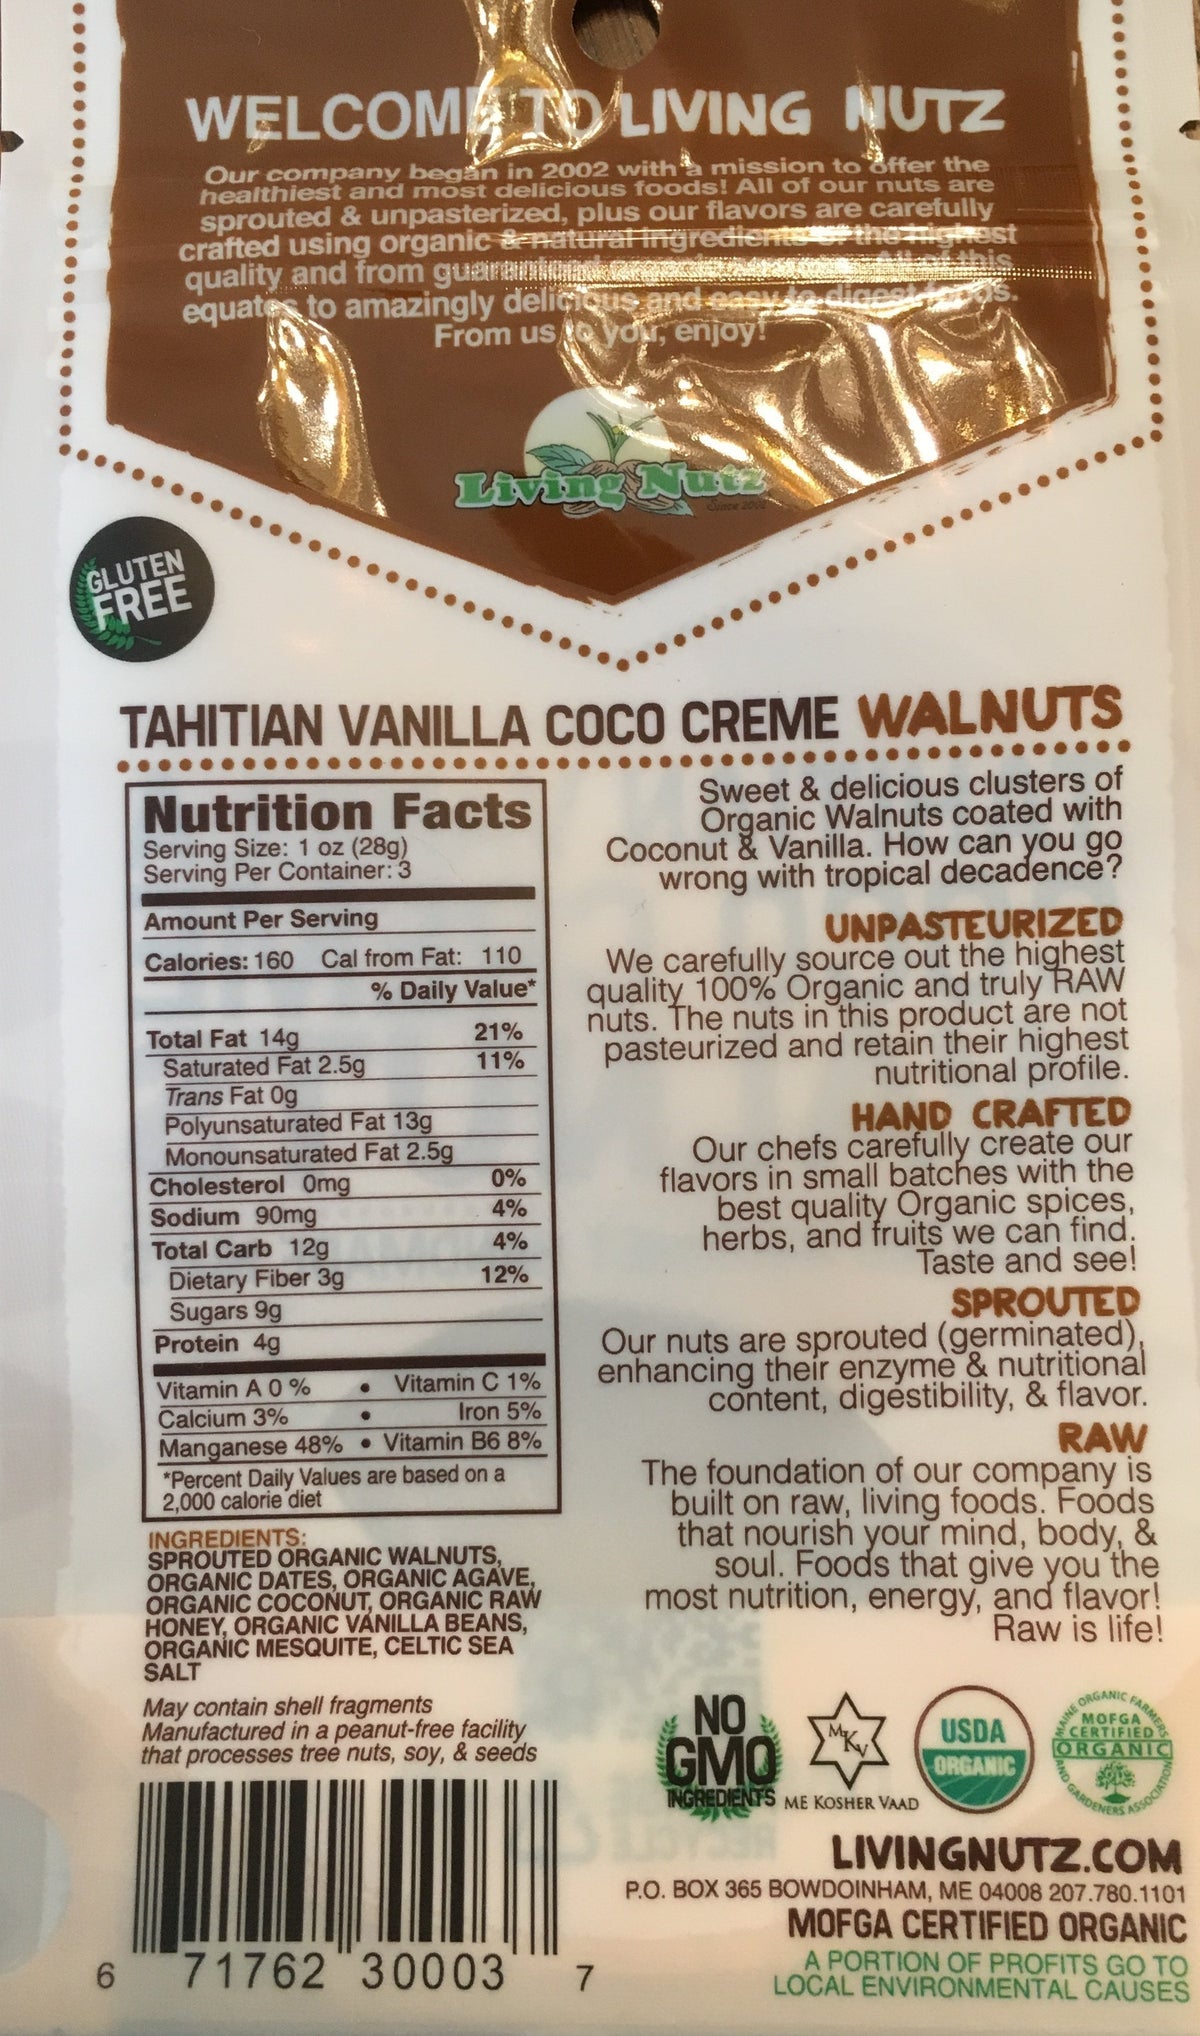  Sprouted nuts. Organic walnuts with vanilla &amp; coconut. Organic nut snacks. Living Nutz